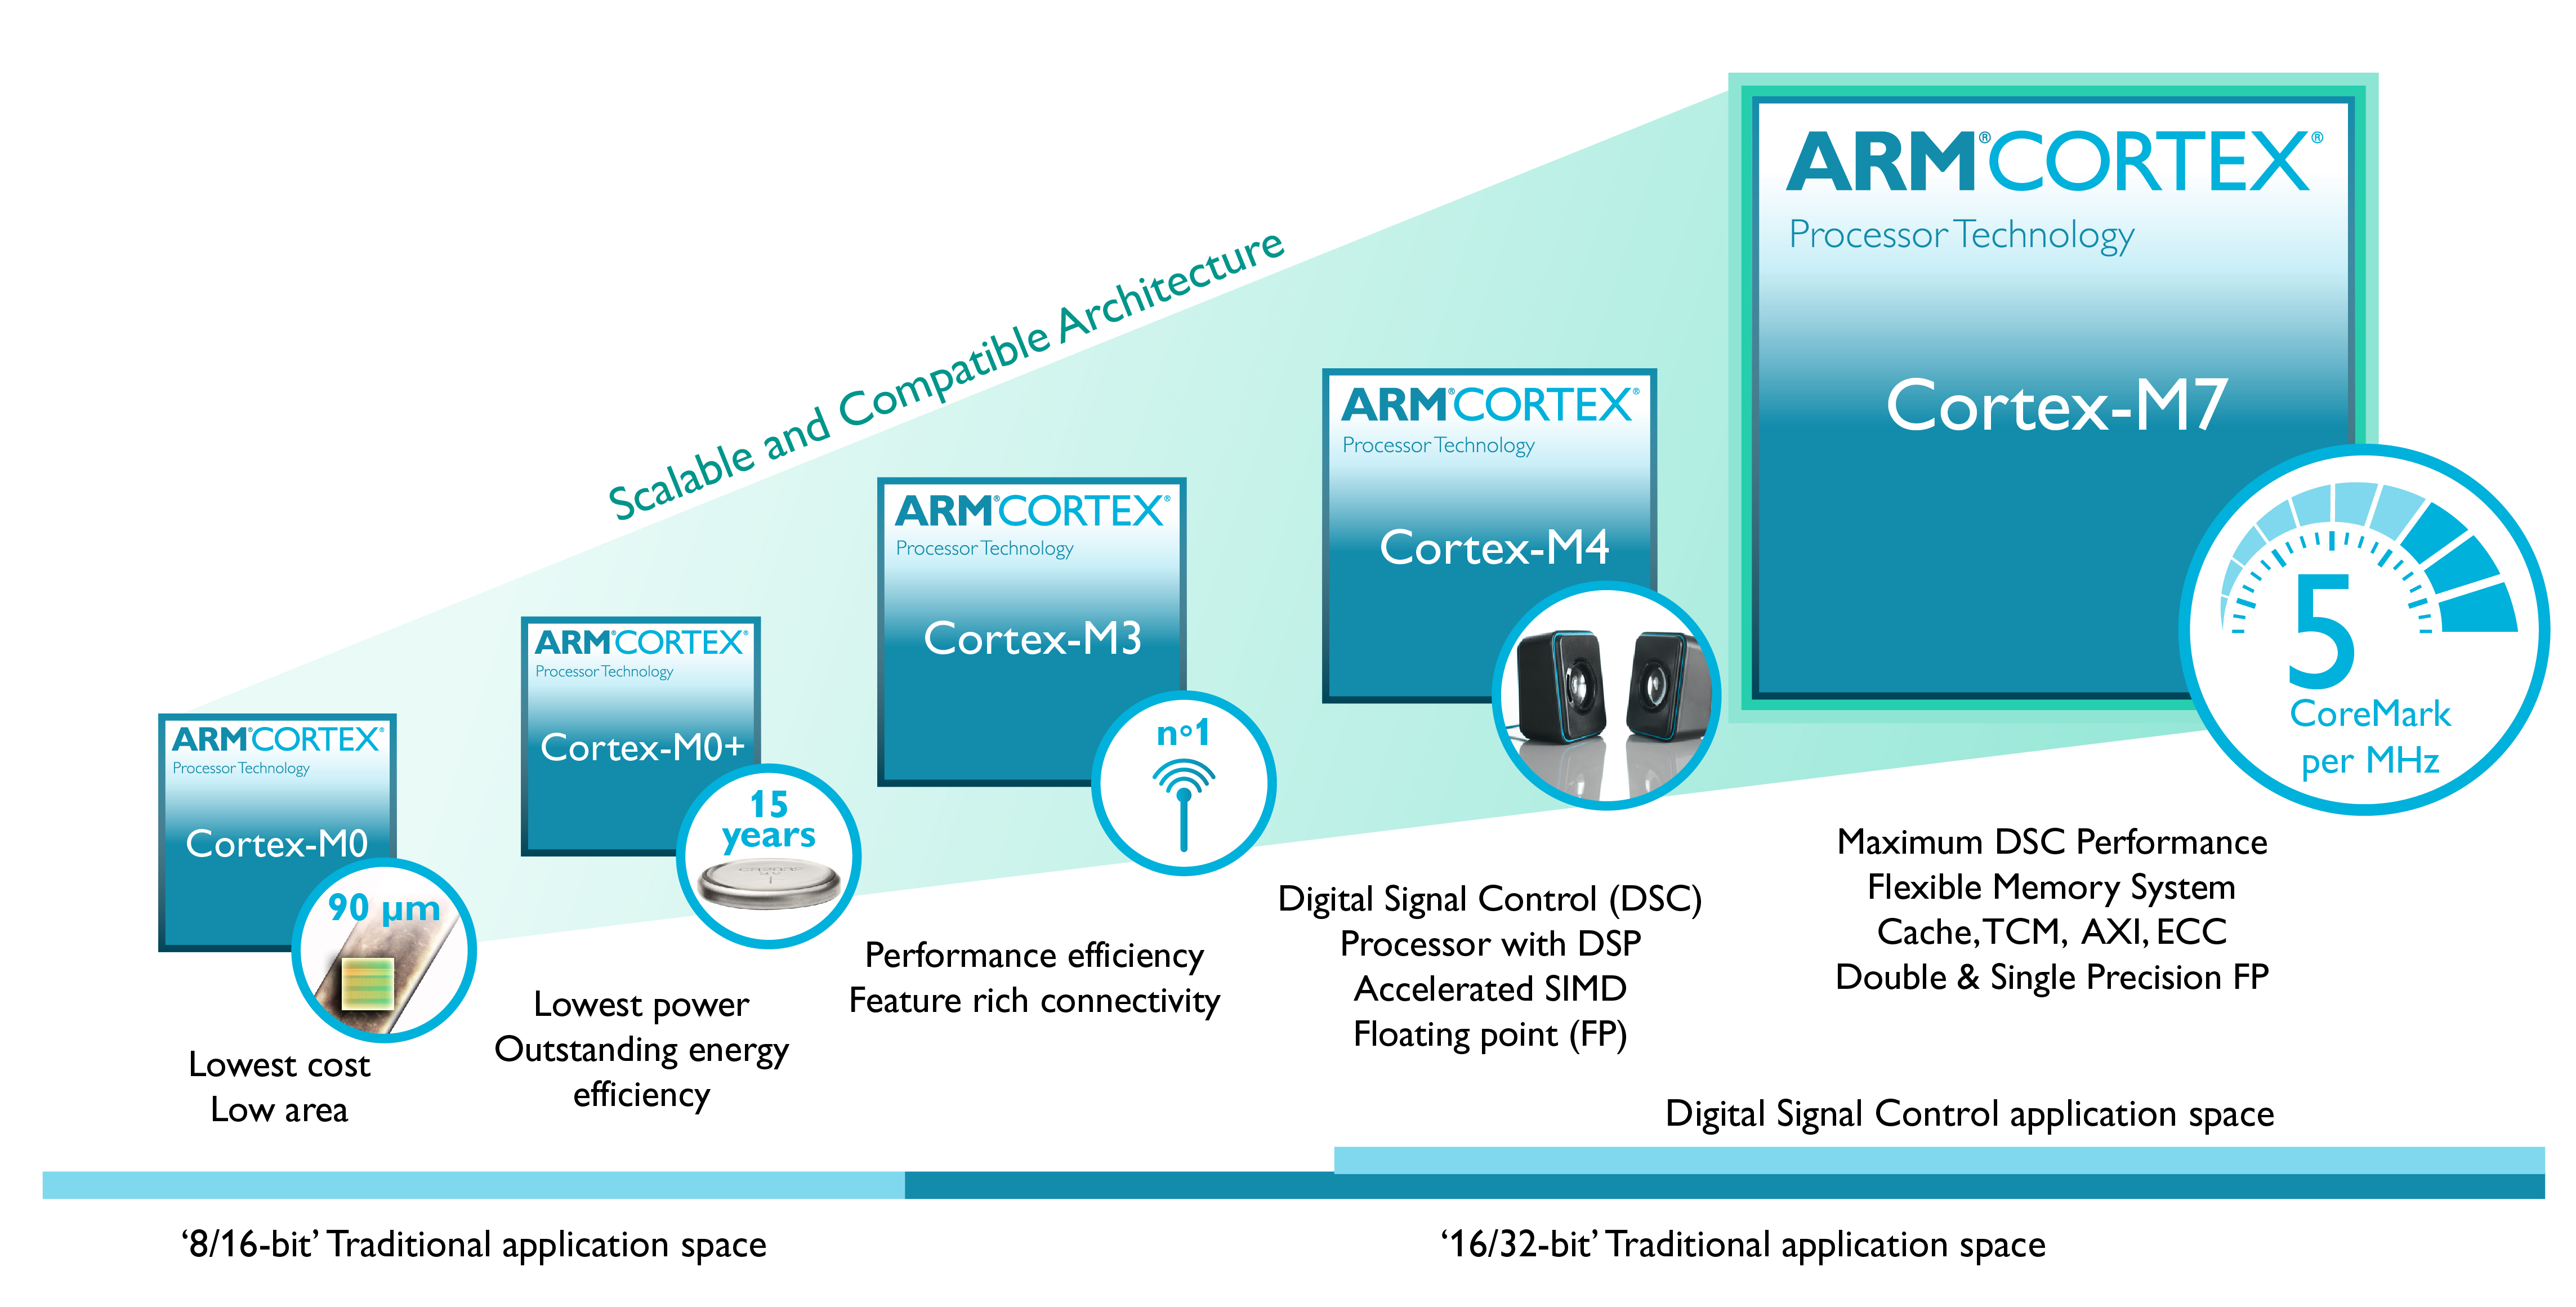 Meet The New Arm Cortex M7 Processor Supercharging Embedded Devices Architectures And Processors Blog Arm Community Blogs Arm Community